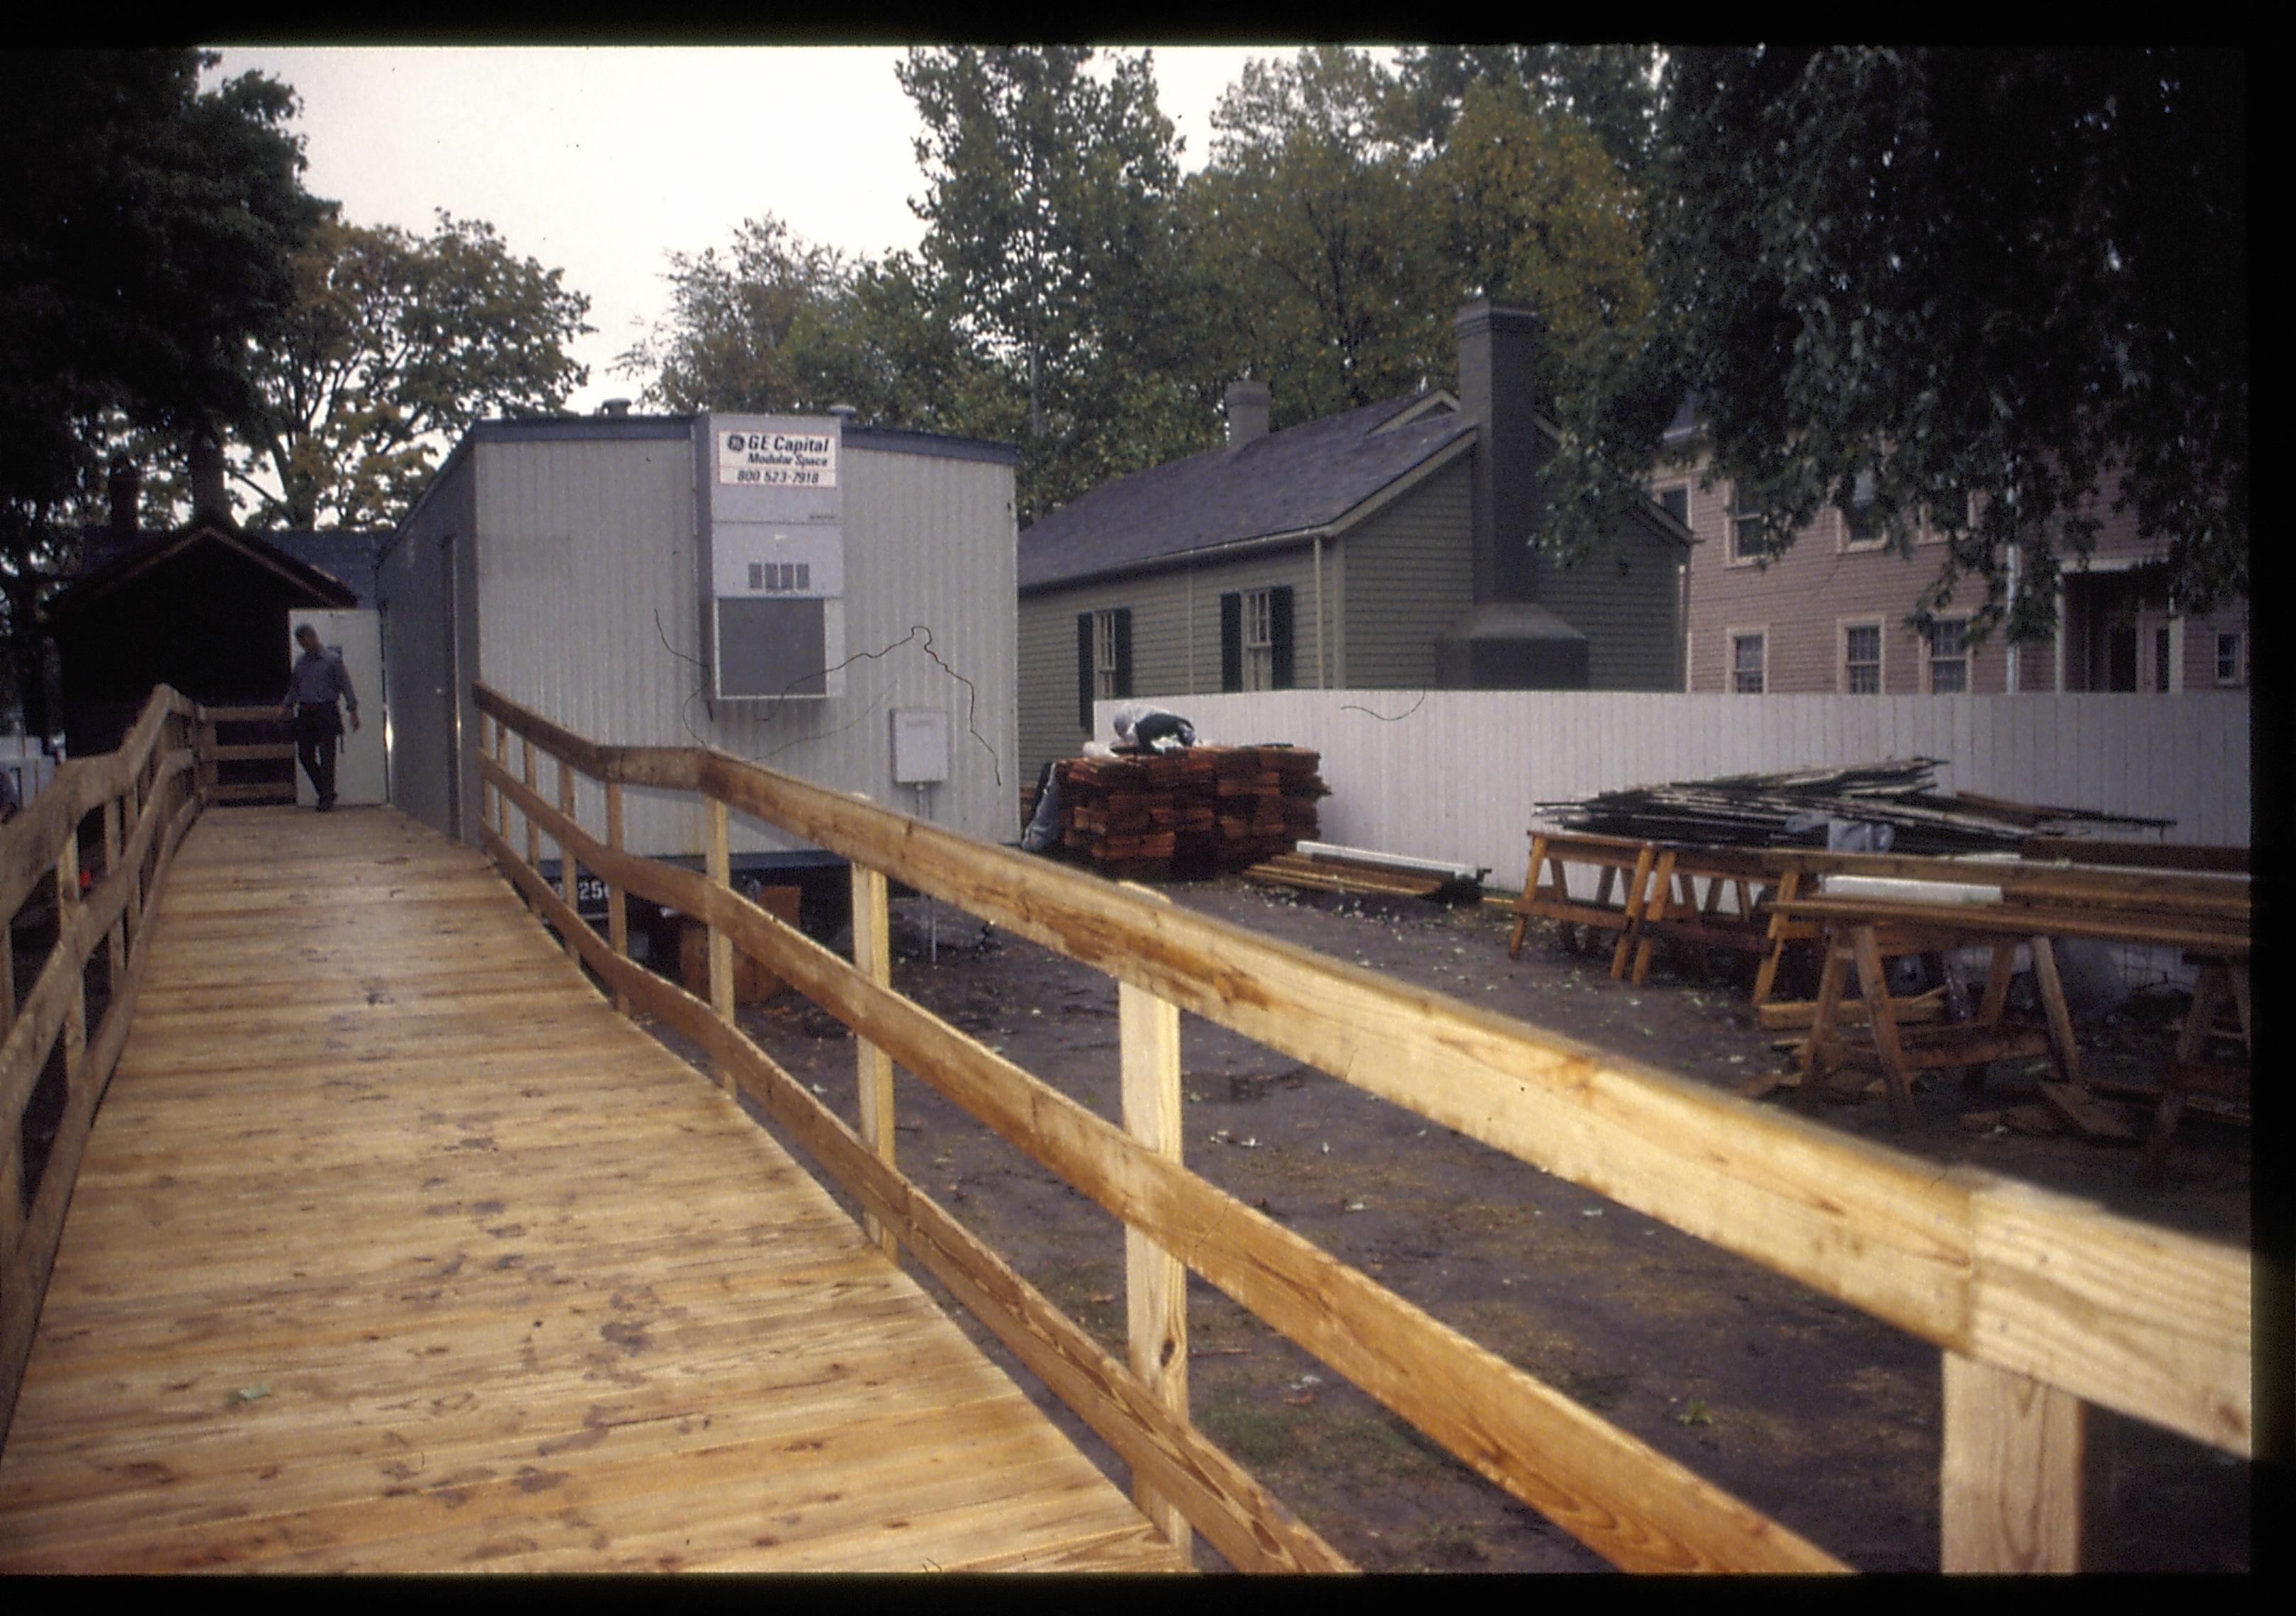 Restroom trailer access ramp Lincoln Home NHS- Visitor Center remodel,  Roll 1999-11 exp 7 Visitor Center, Corneau, restroom, temporary